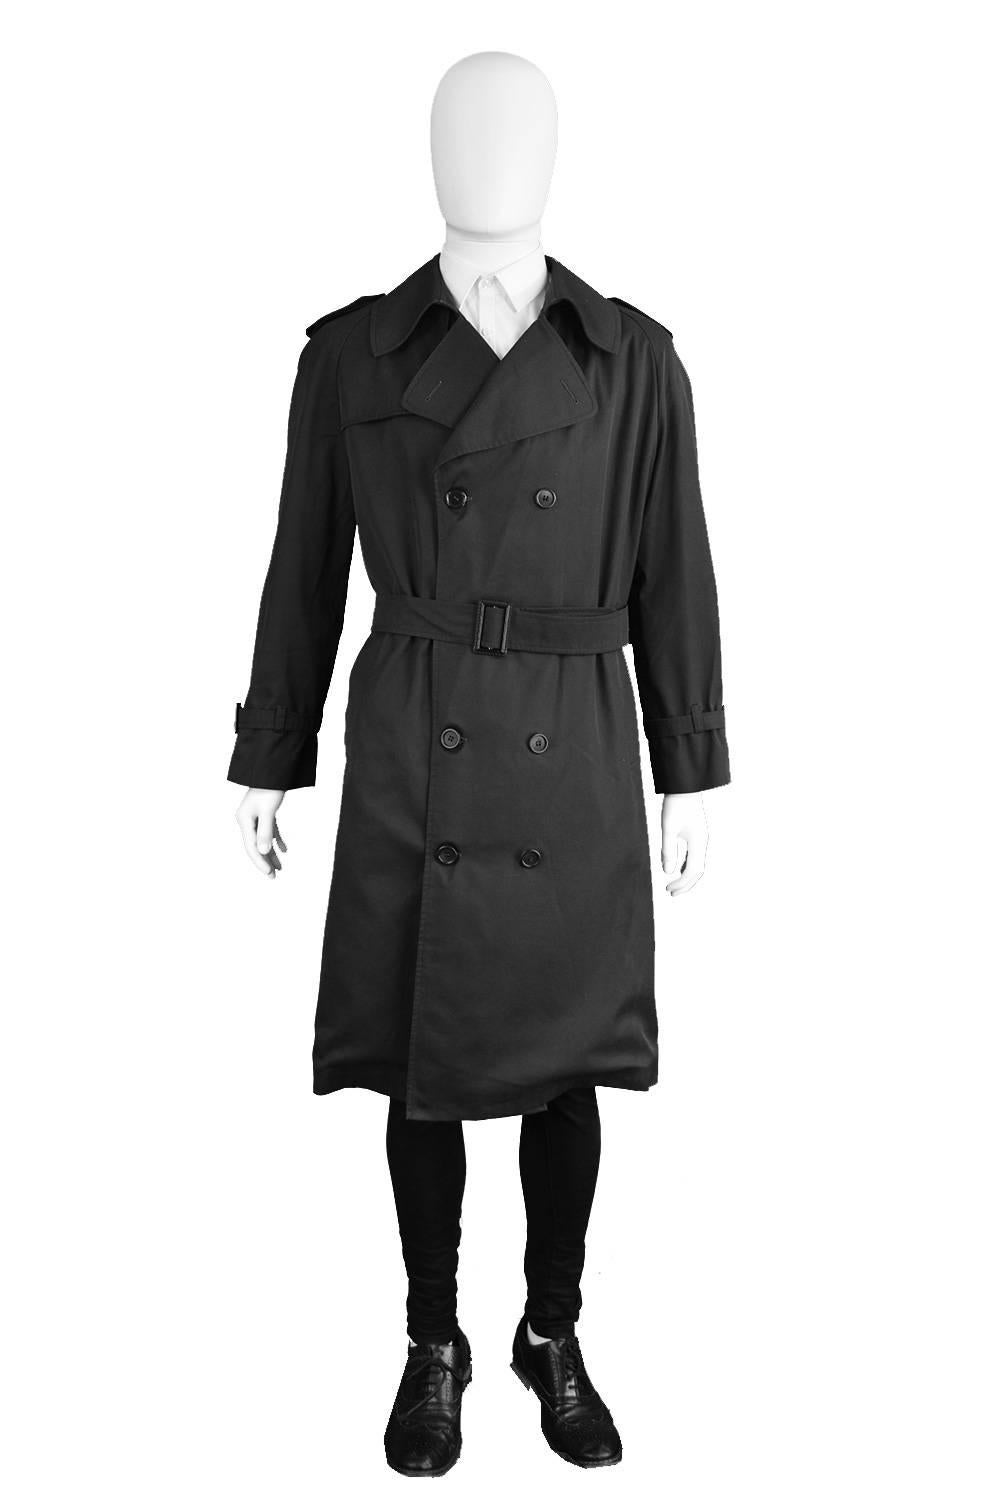 A sophisticated and sartorially excellent vintage Christian Dior Monsieur Paris trench coat with double breasted buttons and a belt which pulls in the waist and gives a more flattering, modern look.  In a dark, almost black, charcoal grey polycotton